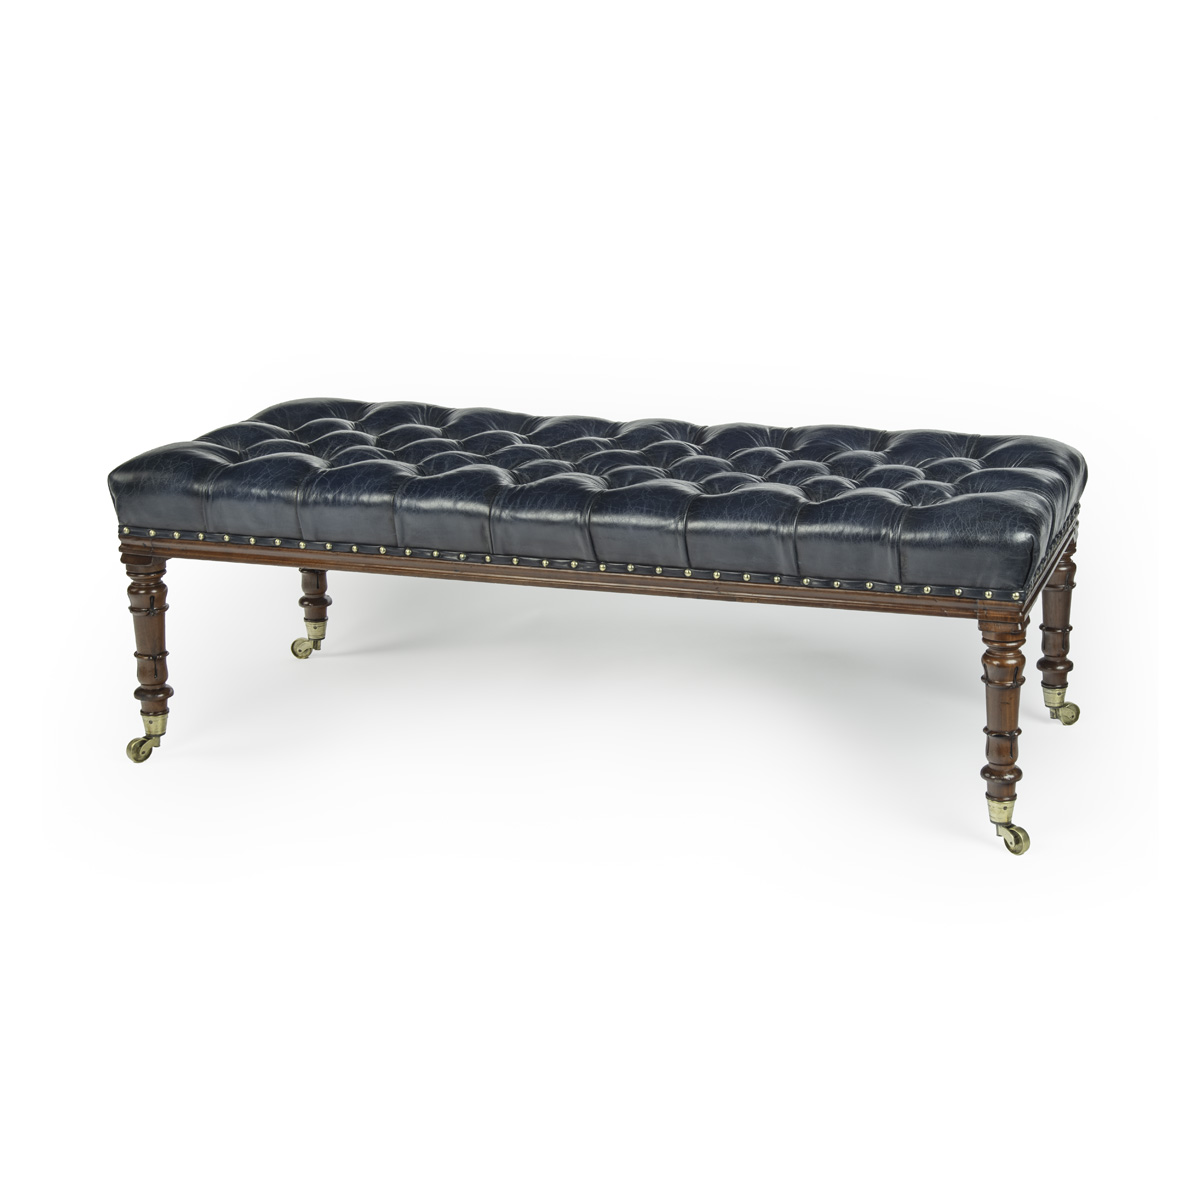 A late Regency mahogany stool, of long rectangular form, the turned tapering legs terminating in the original brass castors, reupholstered in deep buttoned blue leather. English, circa 1815.